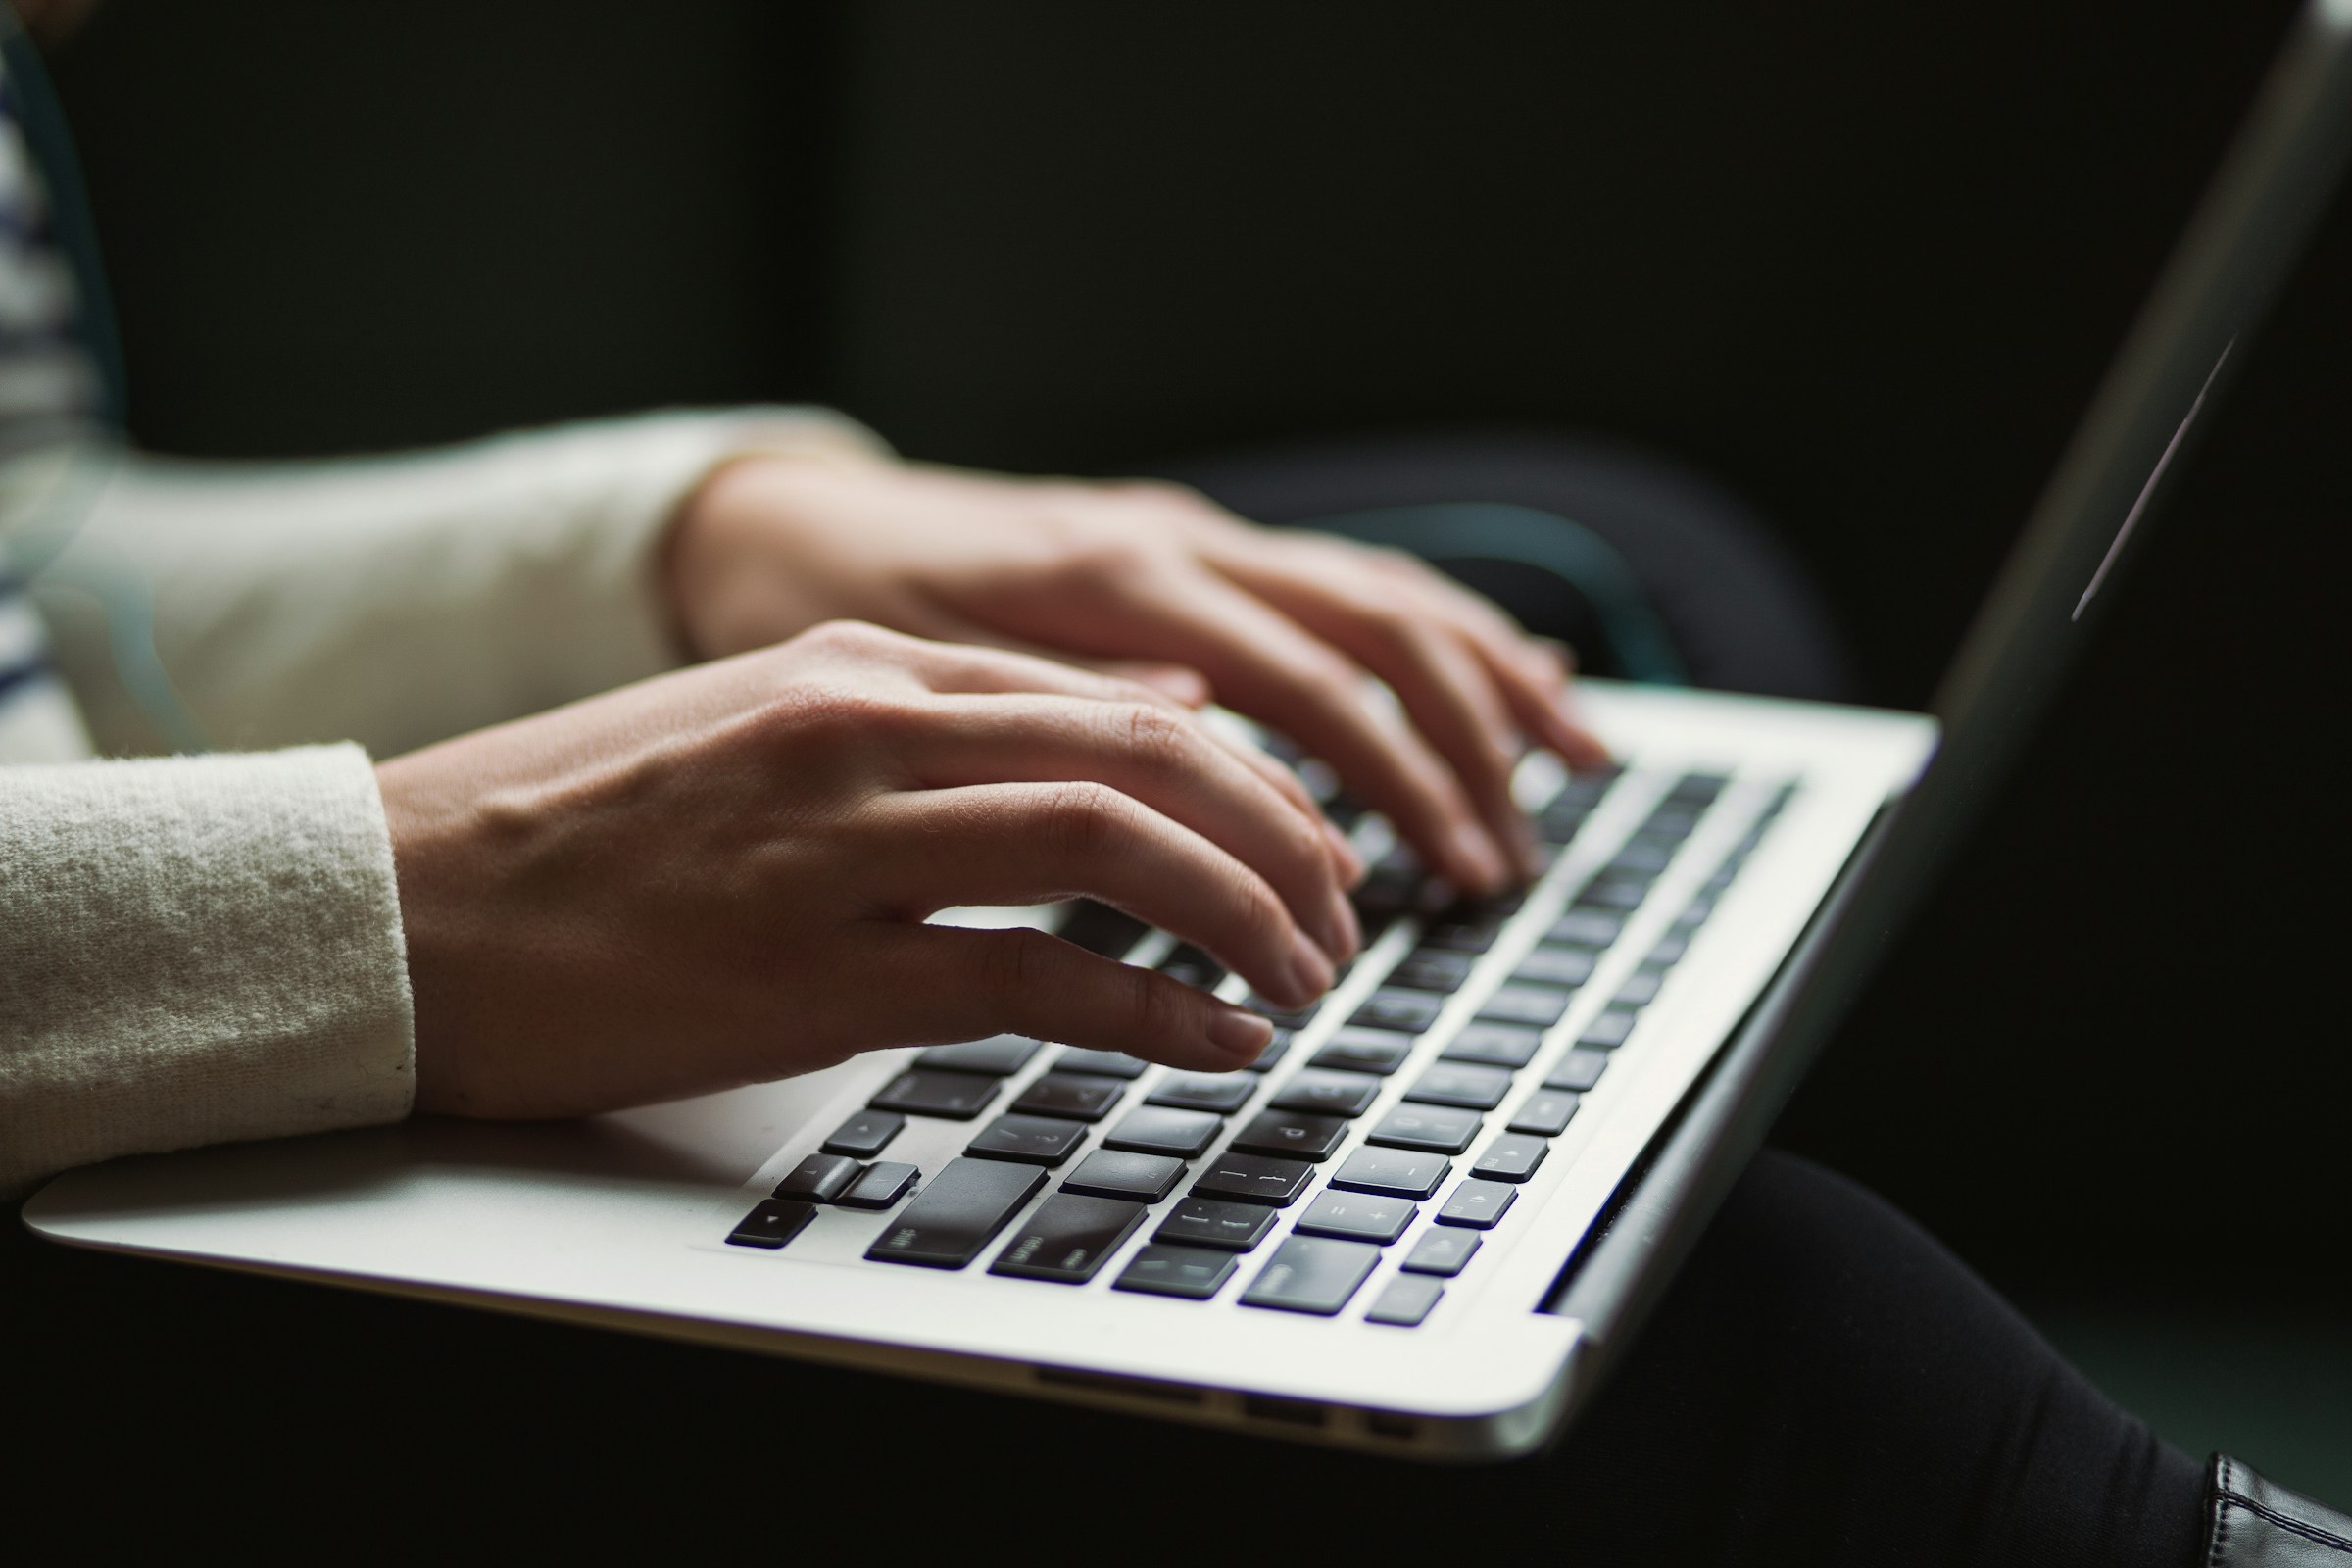 A person typing on a laptop | Source: Unsplash